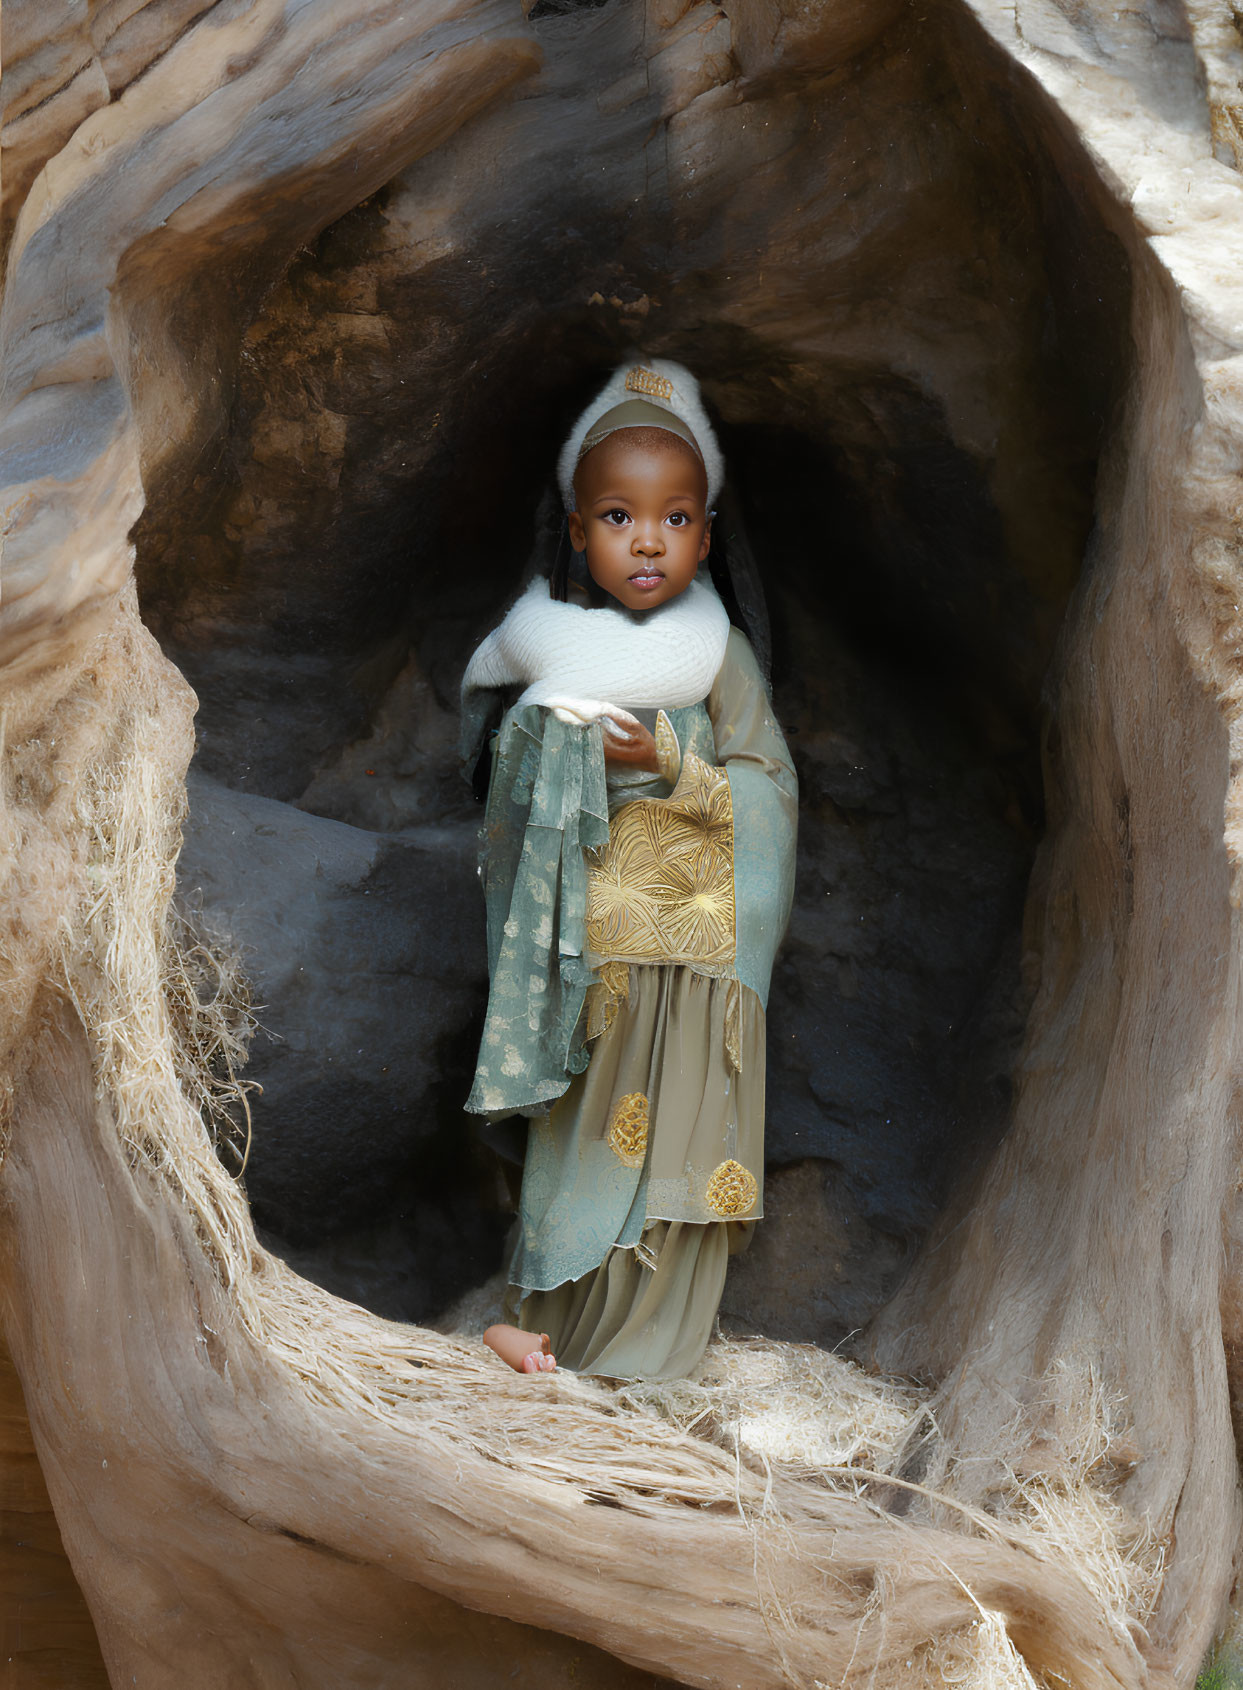 Child in traditional attire standing in tree hollow with serene expression